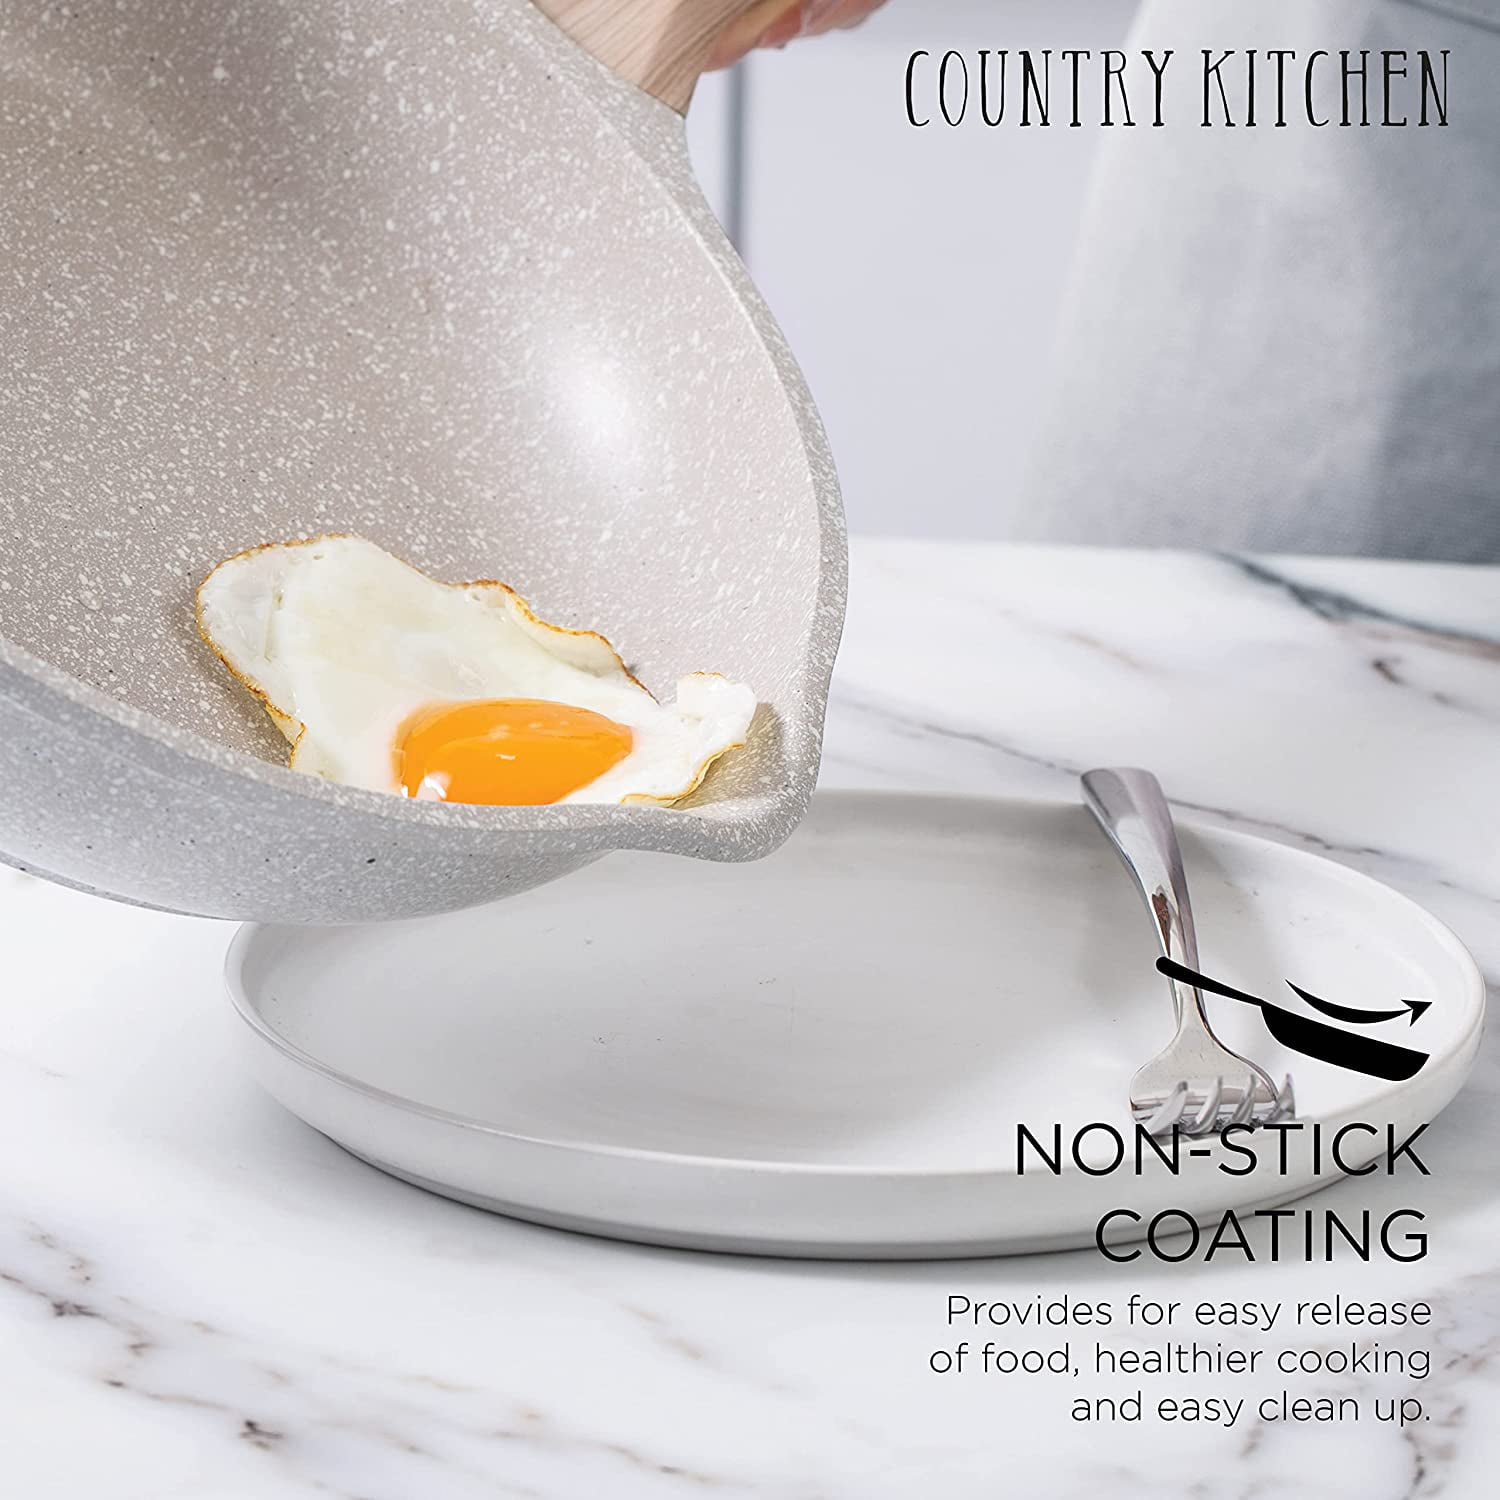 Country Kitchen country kitchen nonstick cookware sets - 6 piece nonstick cast  aluminum pots and pans with bakelite handles - non-toxic pots